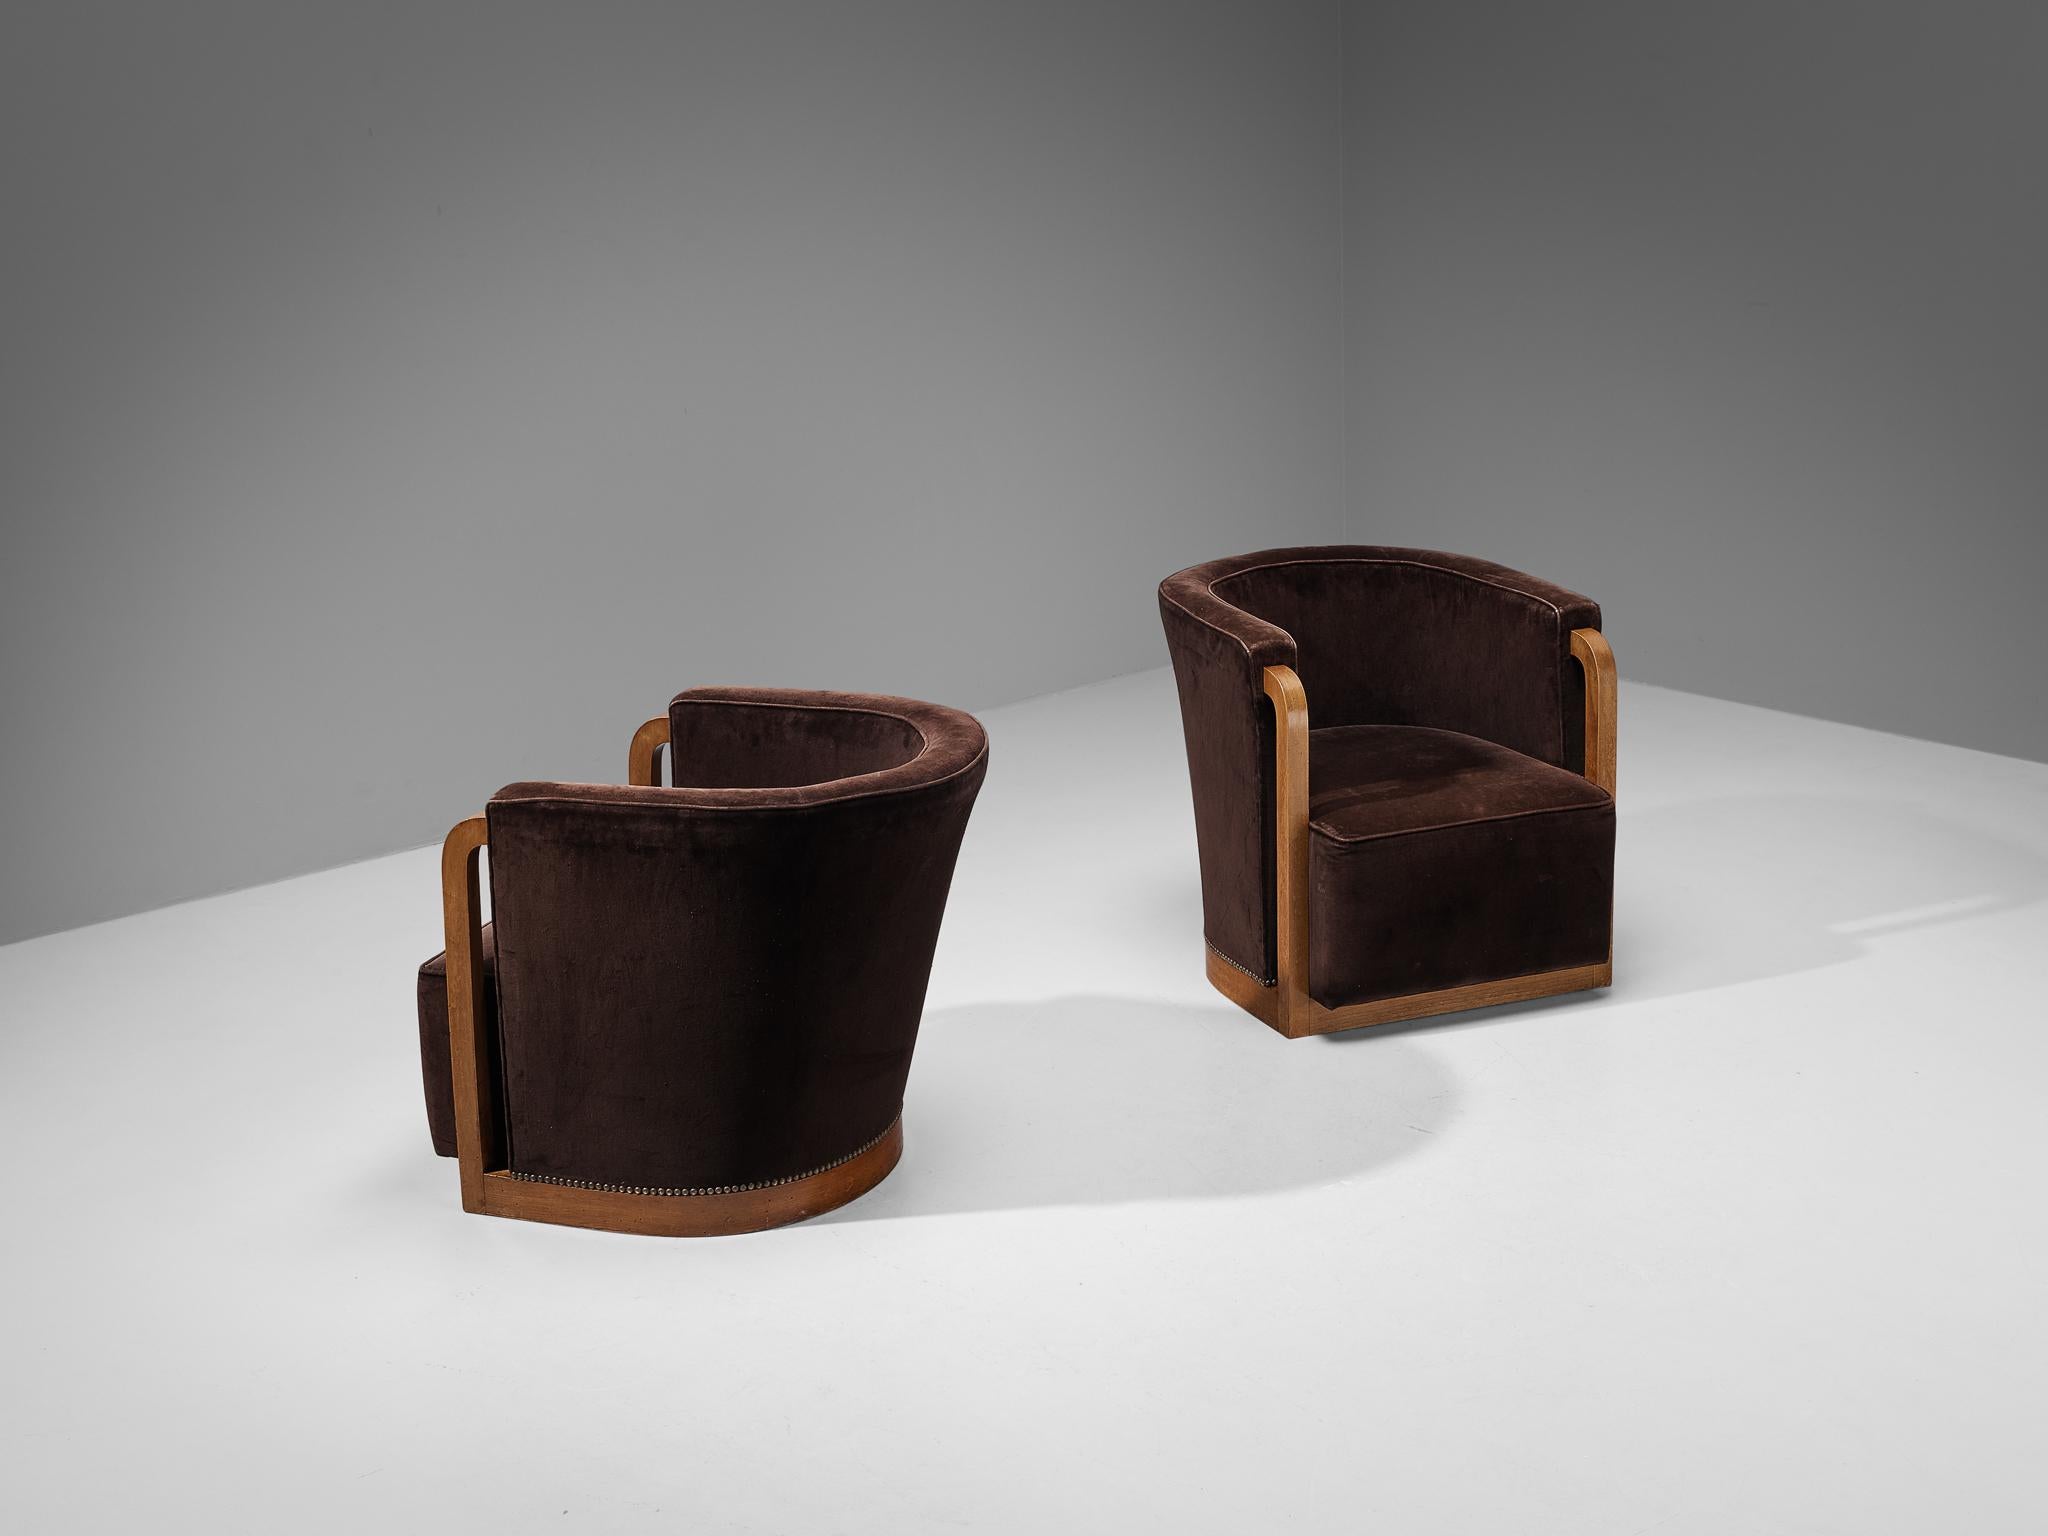 Pair of armchairs, stained beech, velvet, brass, France, circa 1930

These beautifully designed lounge chairs are created in one of the most influential periods for the arts namely the Art Deco Movement. These rare lounge chair originate from